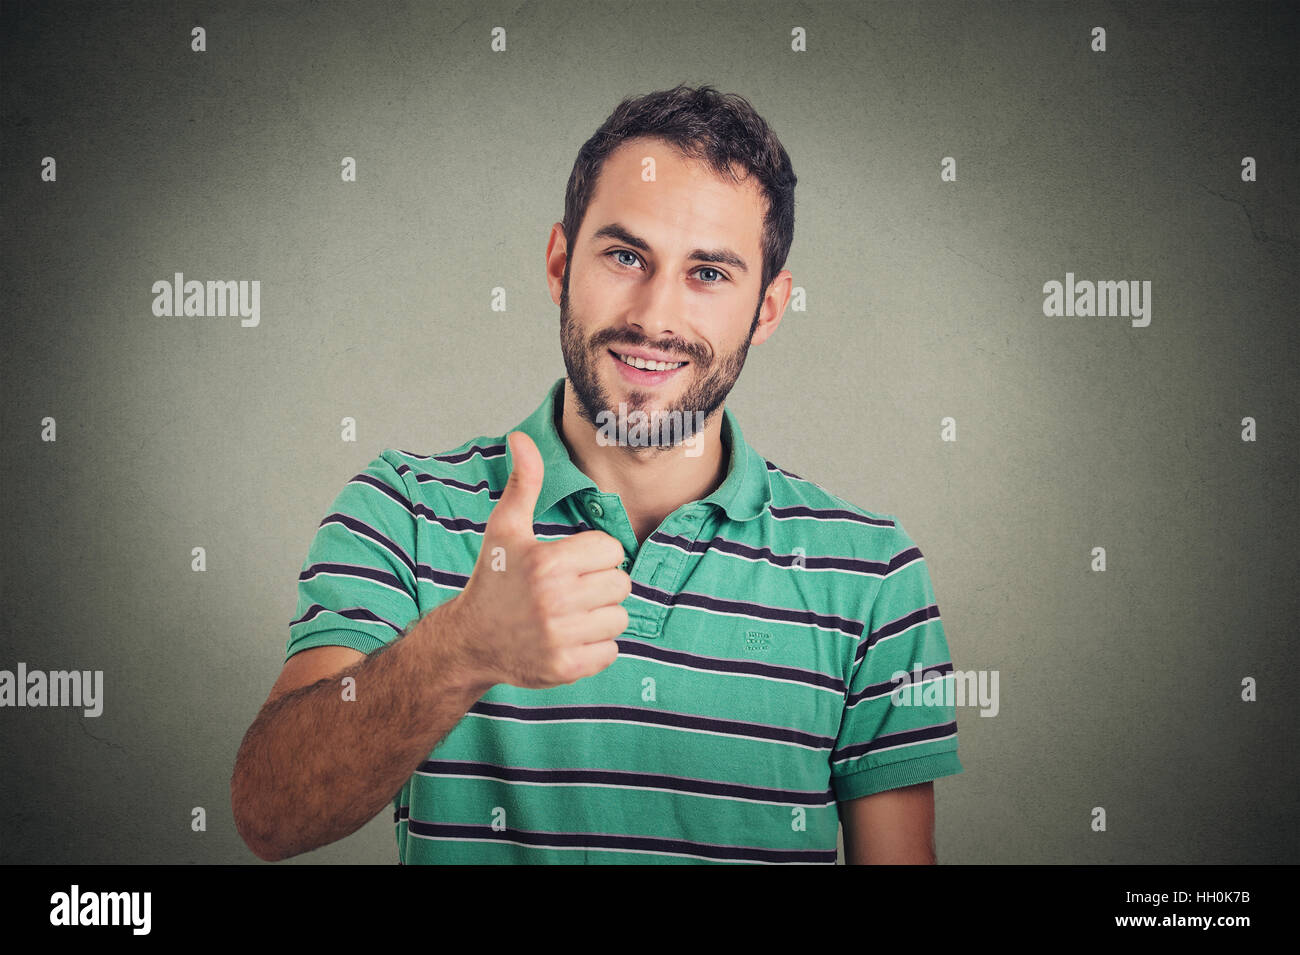 Happy man giving thumbs up sign isolated on gray wall background. Positive human face expression body language Stock Photo